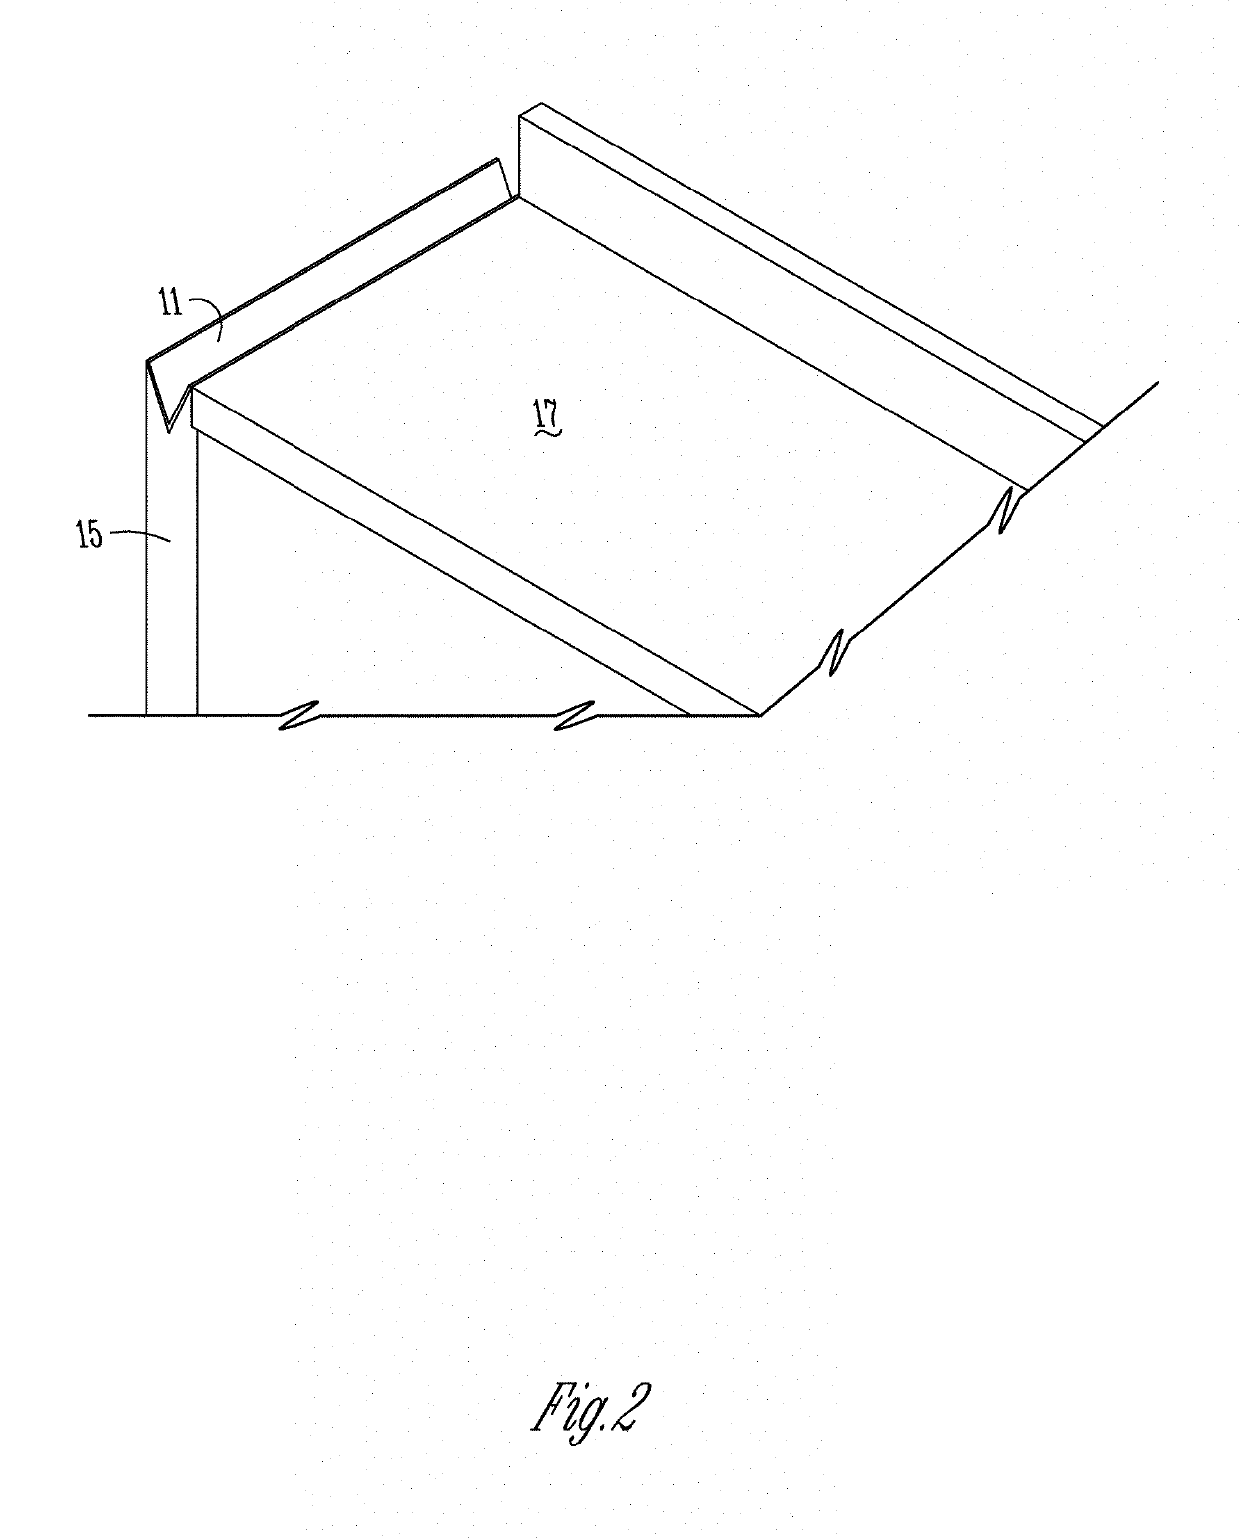 Device for preventing small items from falling between several objects